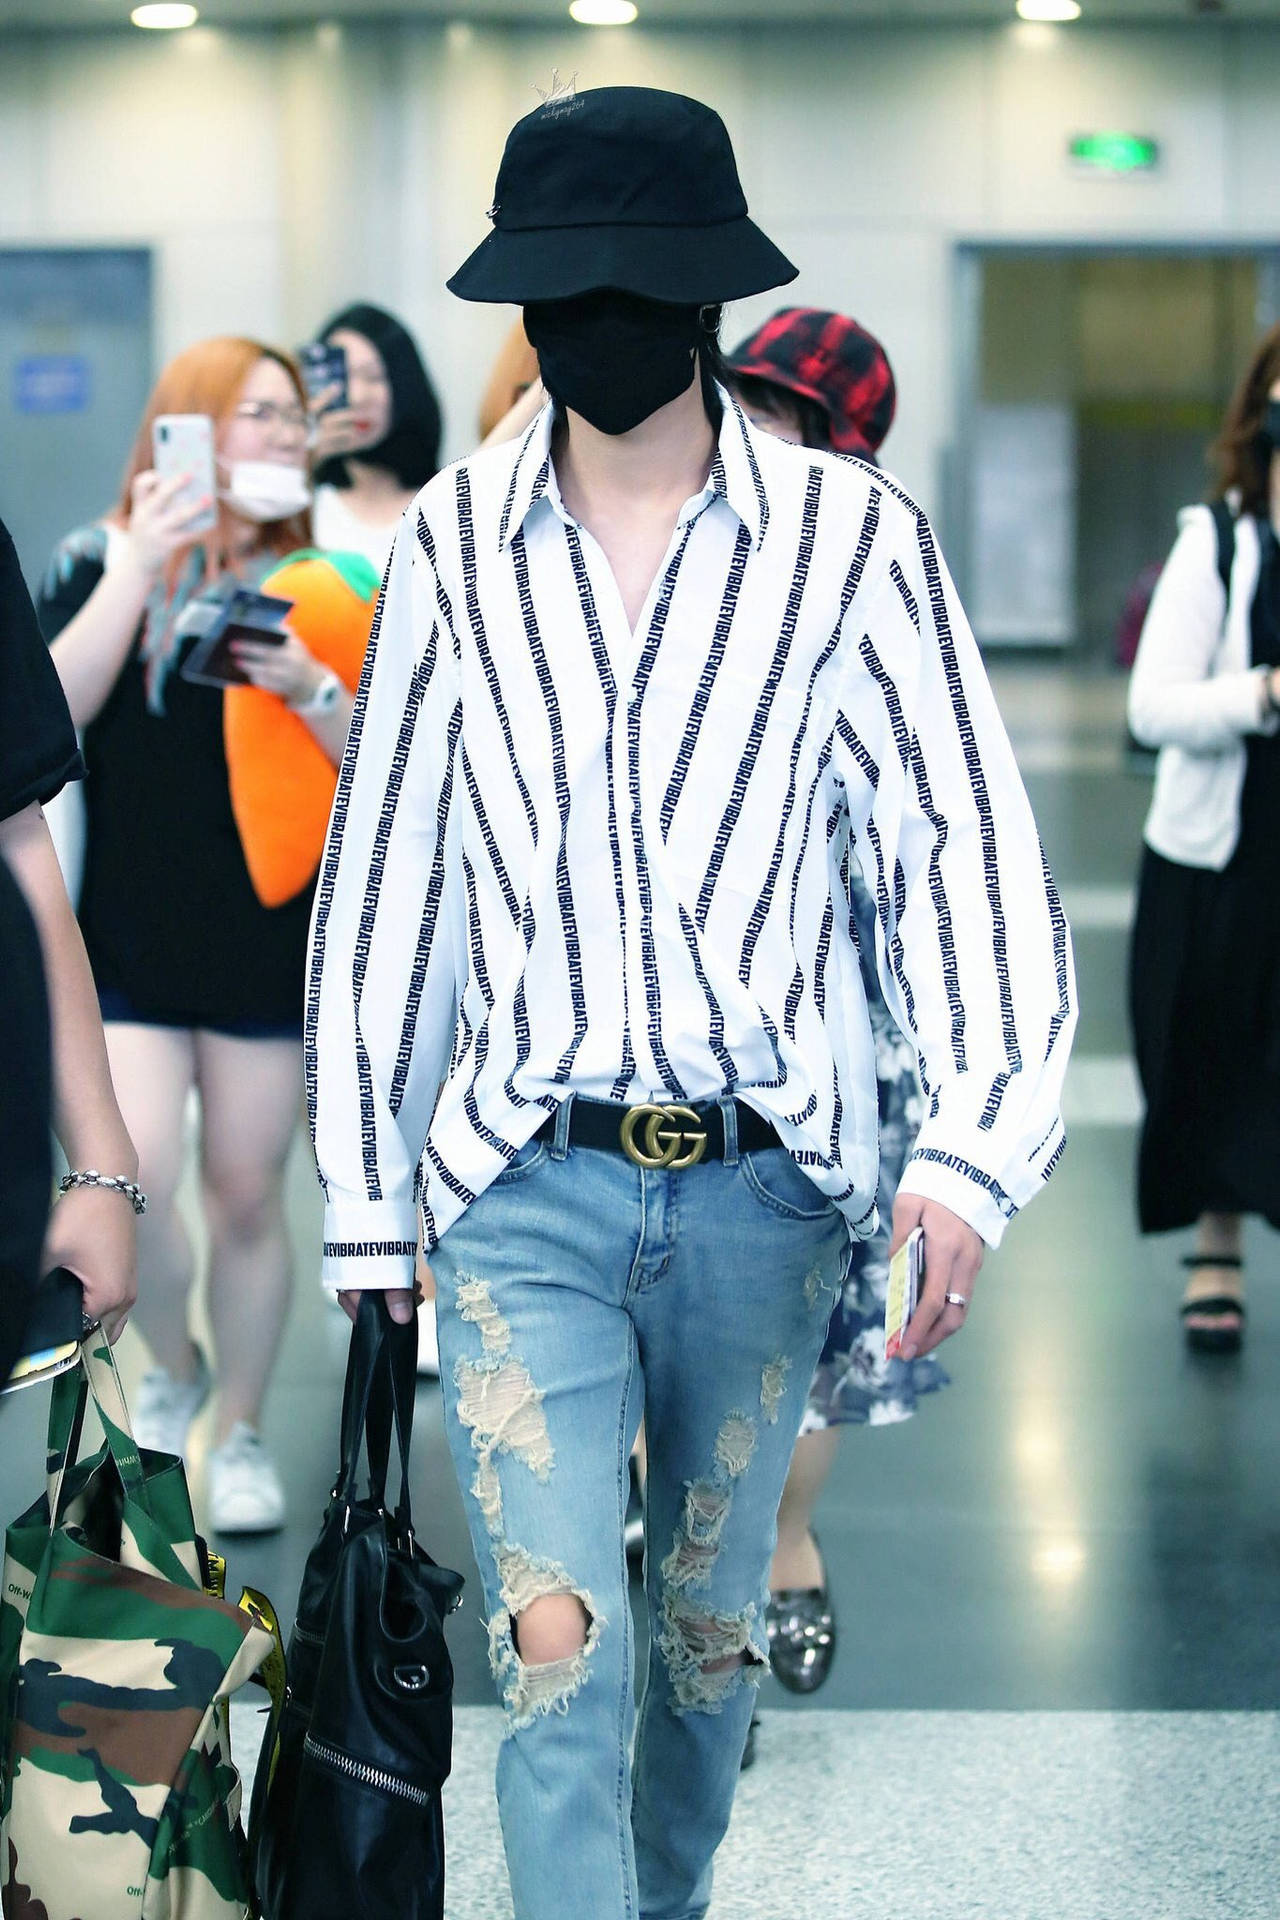 Fashion-forward K-pop Artist: 'The8' at the Airport Wallpaper